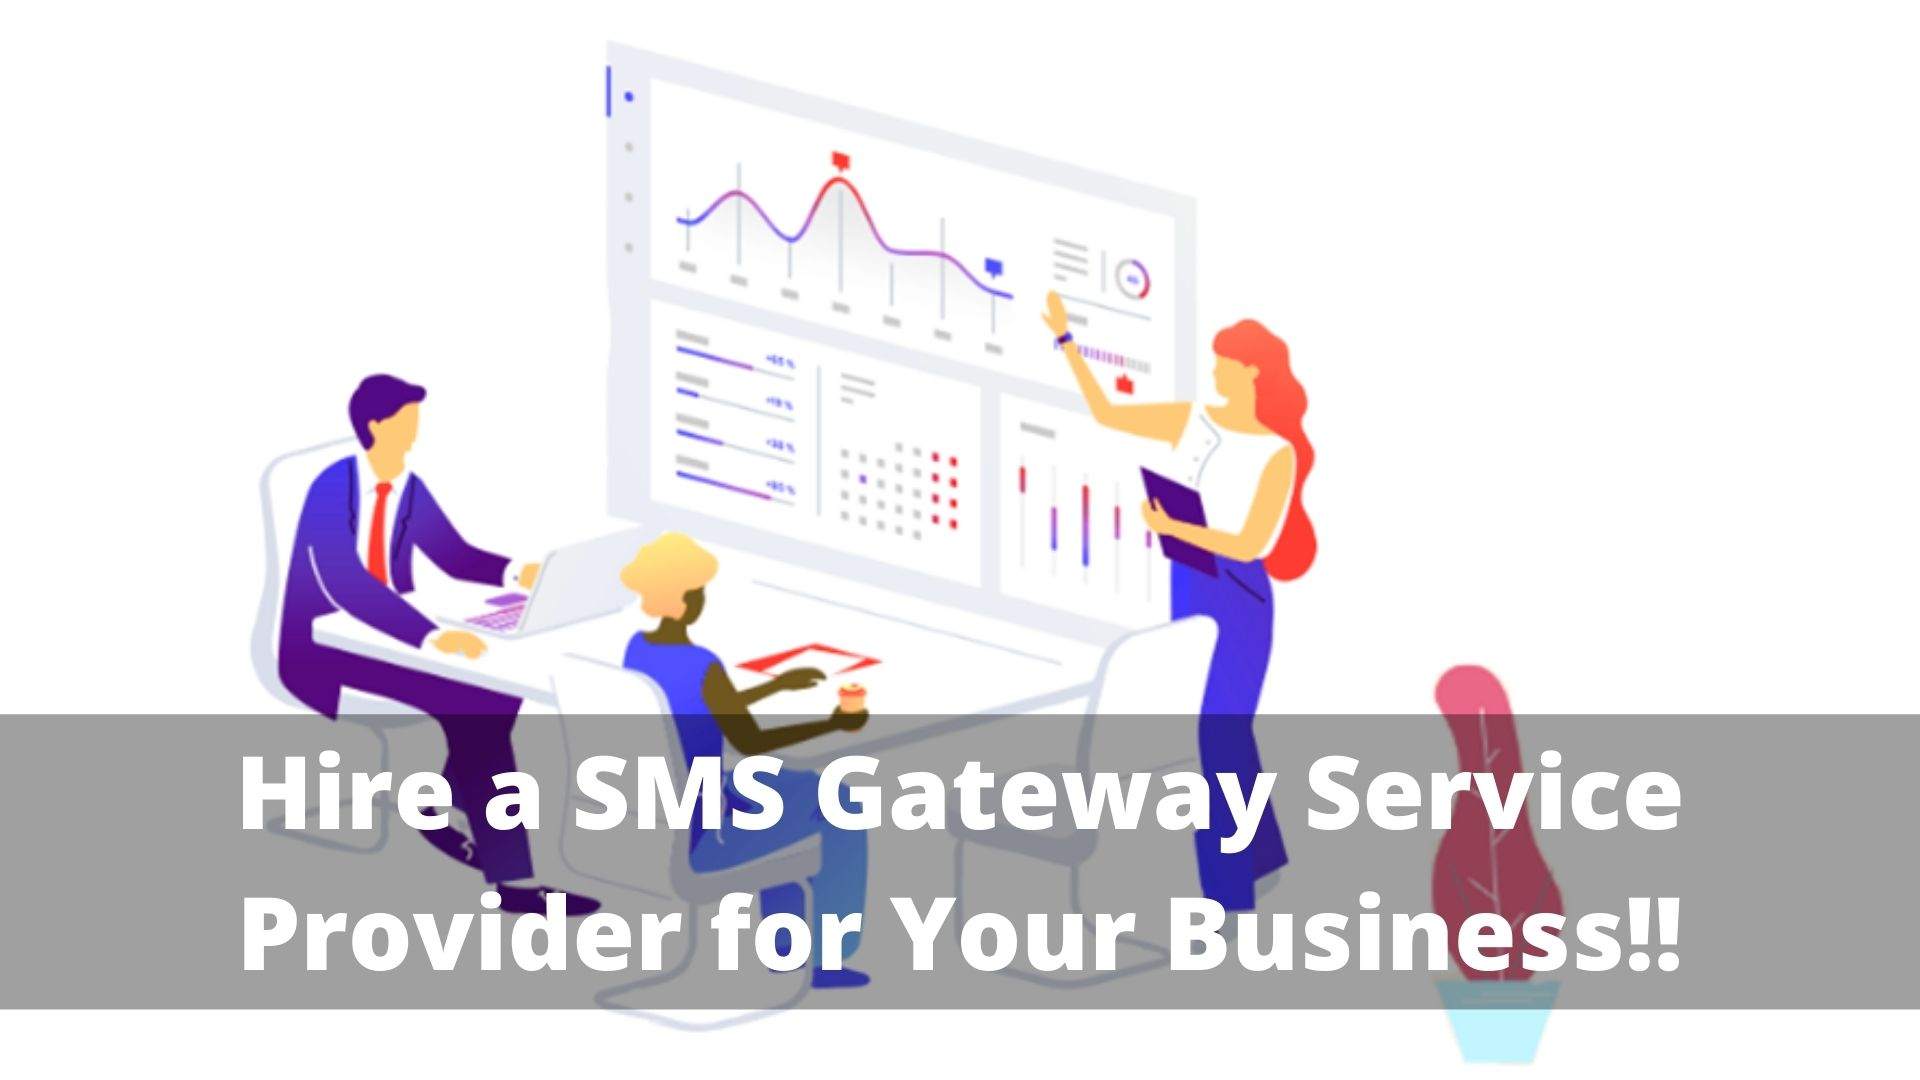 Hire a Good SMS Gateway Service Provider for Your Business!